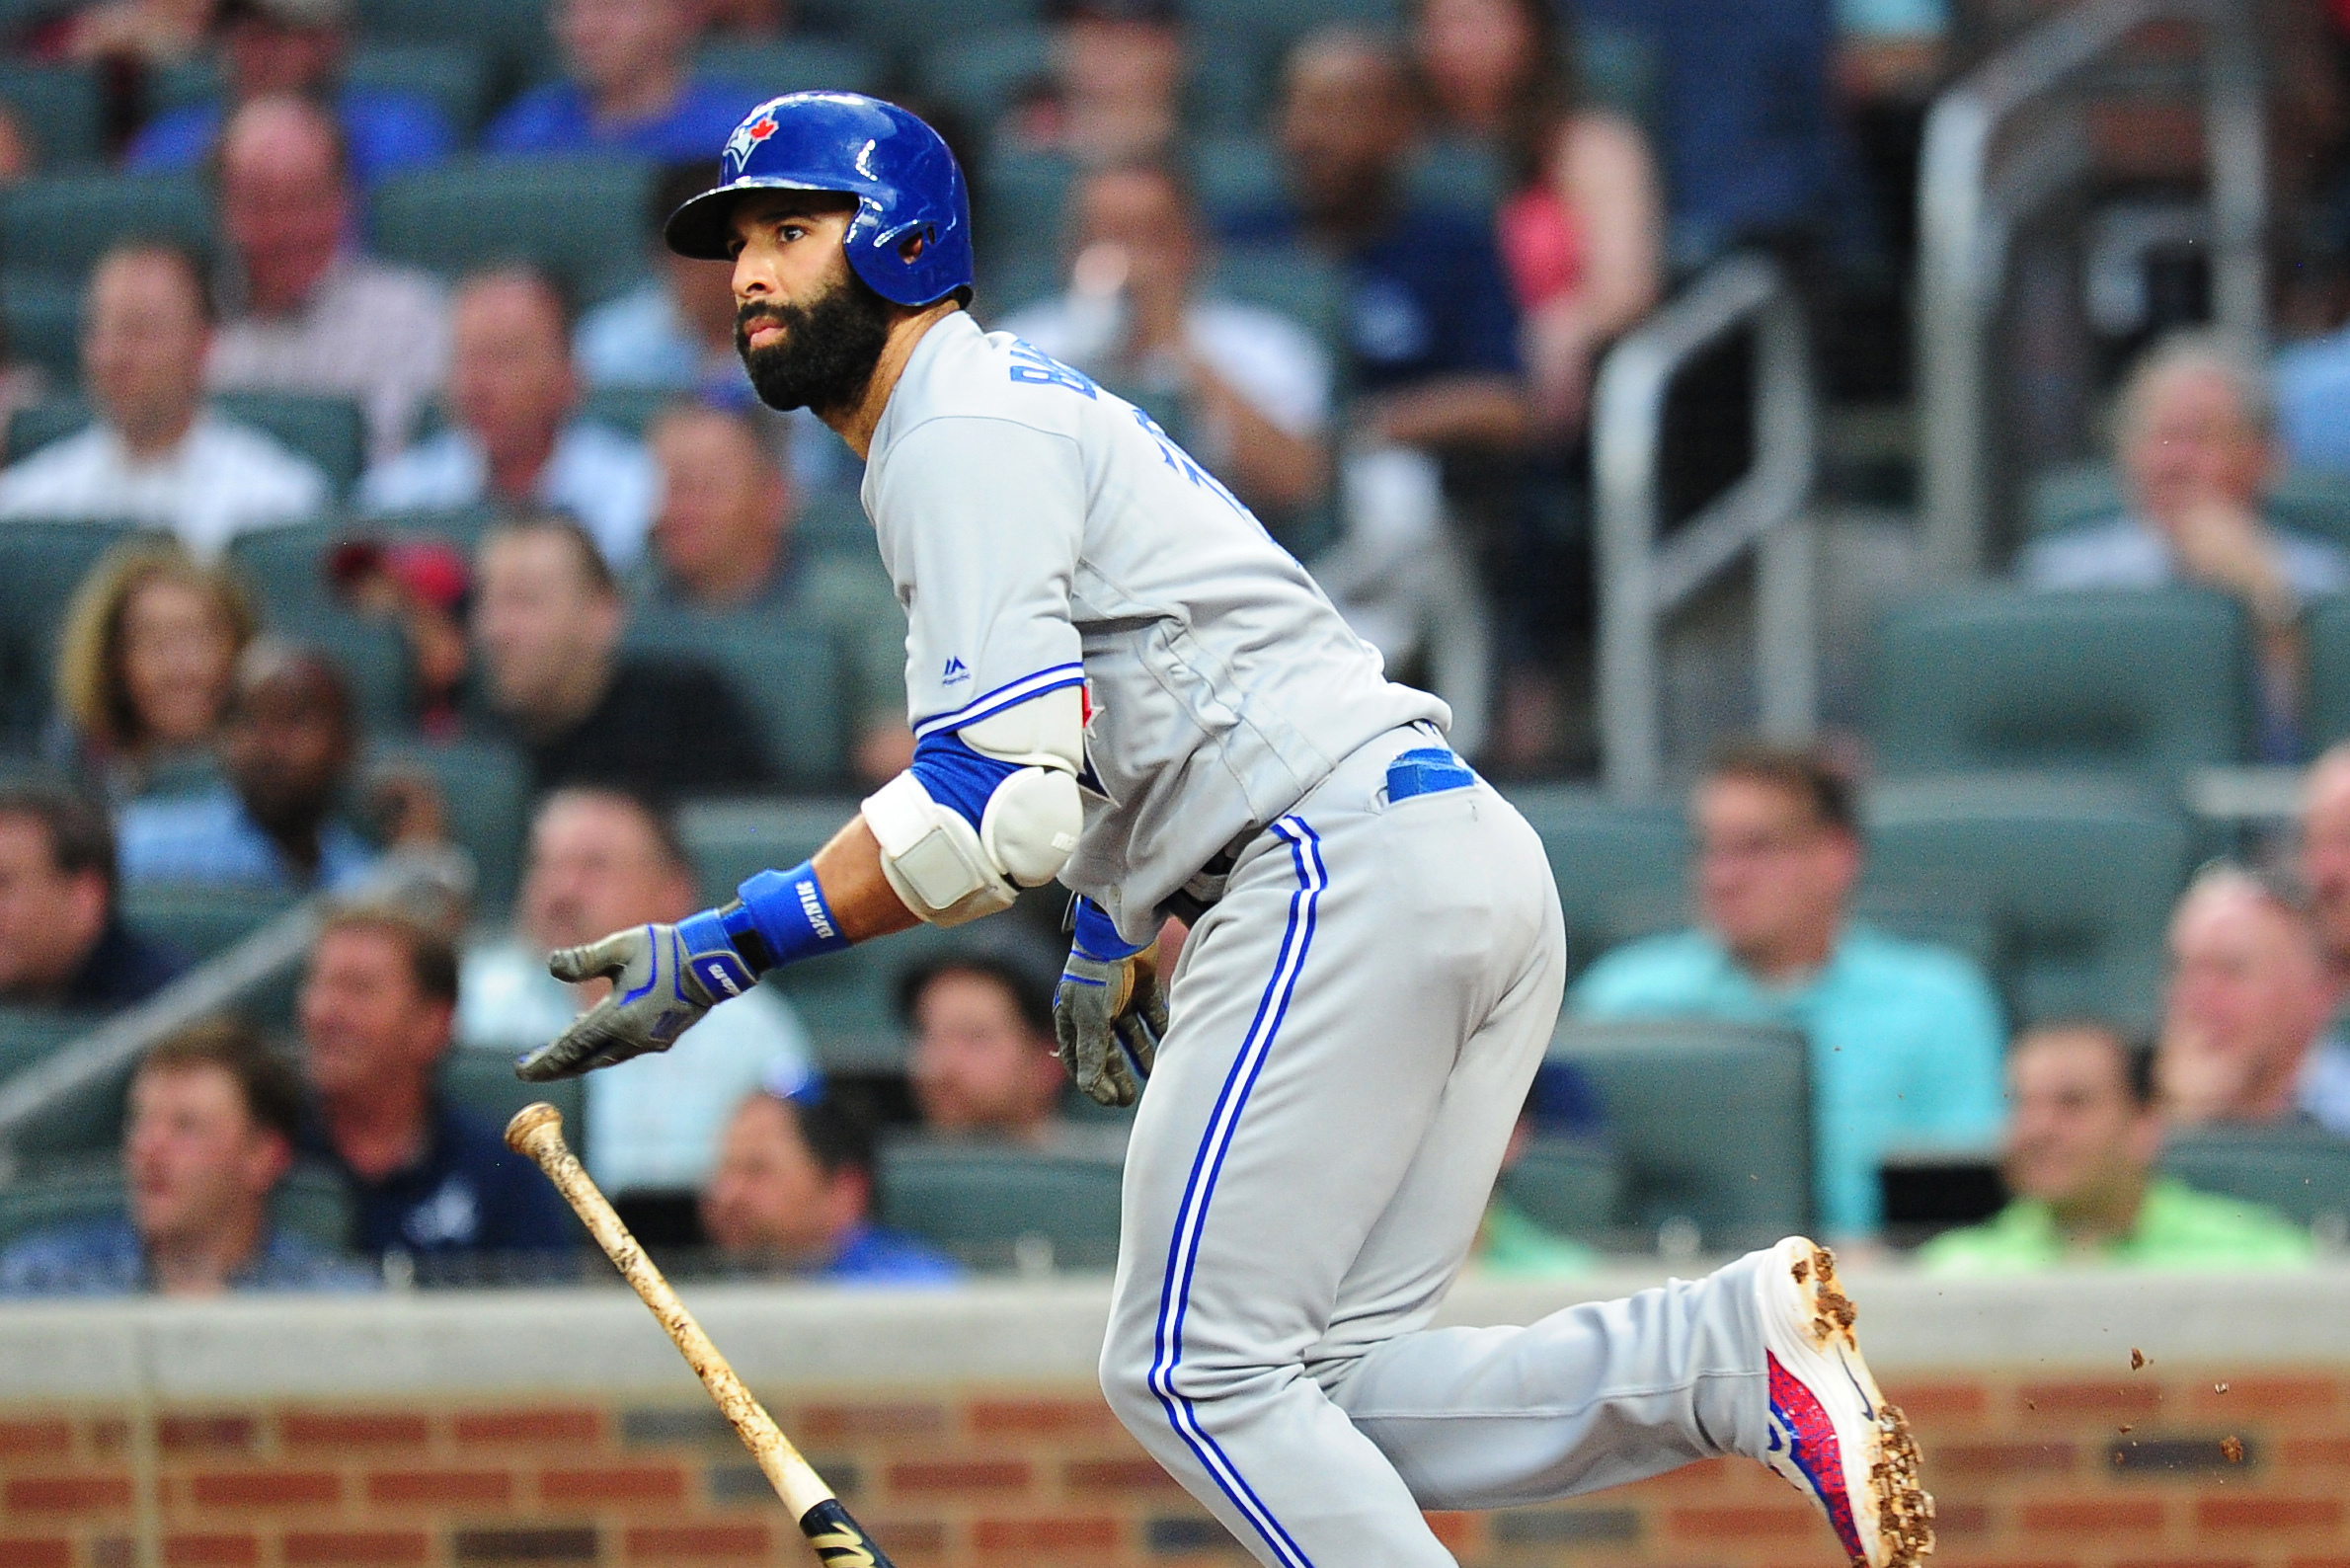 Jose Bautista responds to wild pitch with a monster my-bat-does